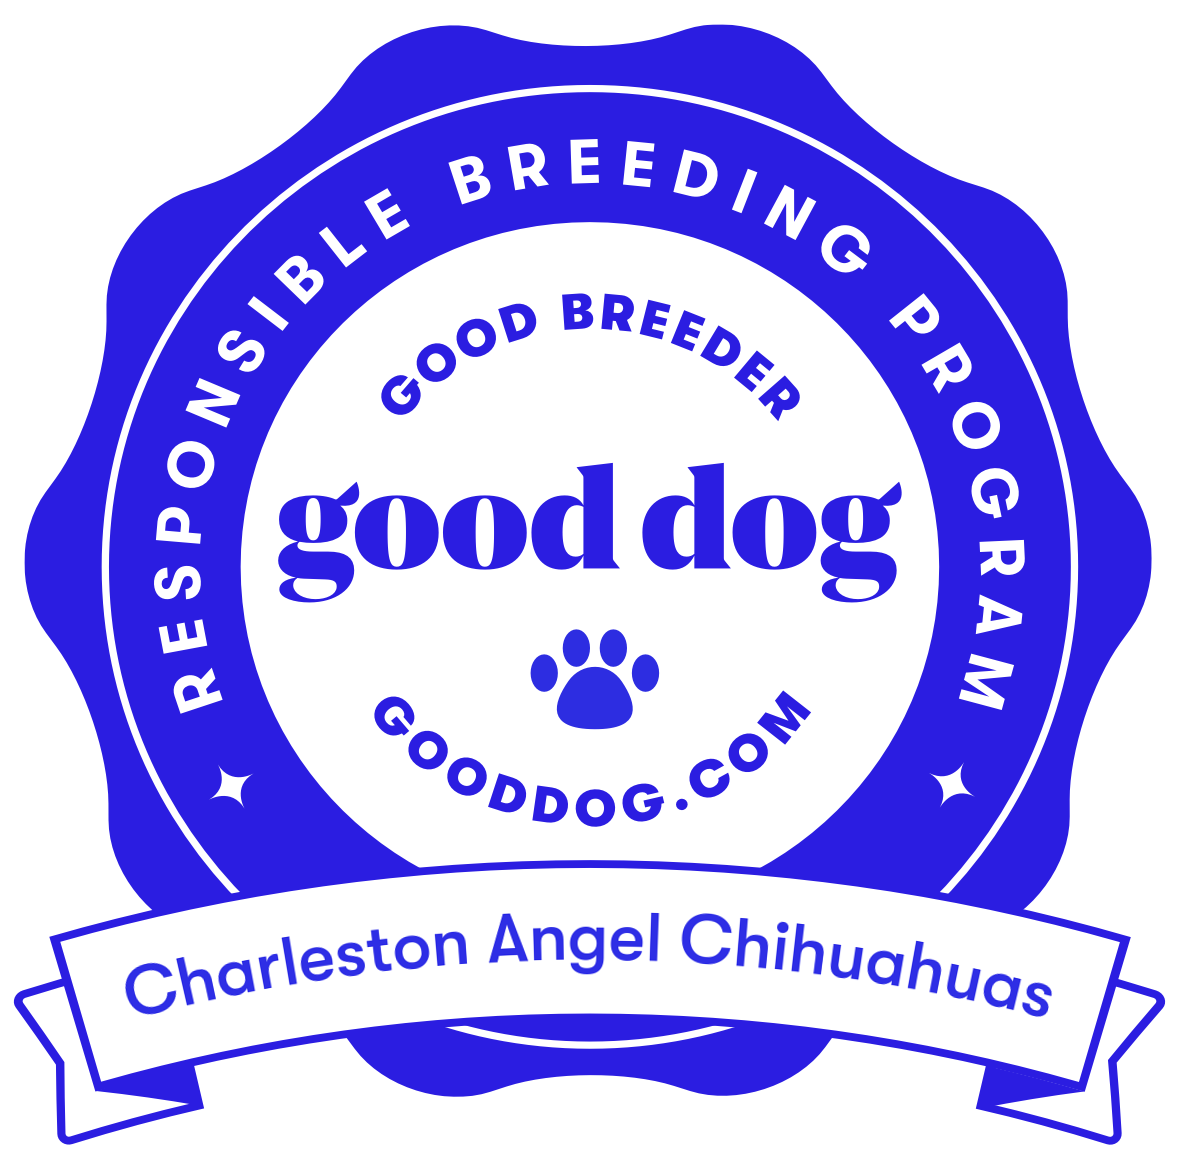 Proudly accepted by Good Dog breeders.